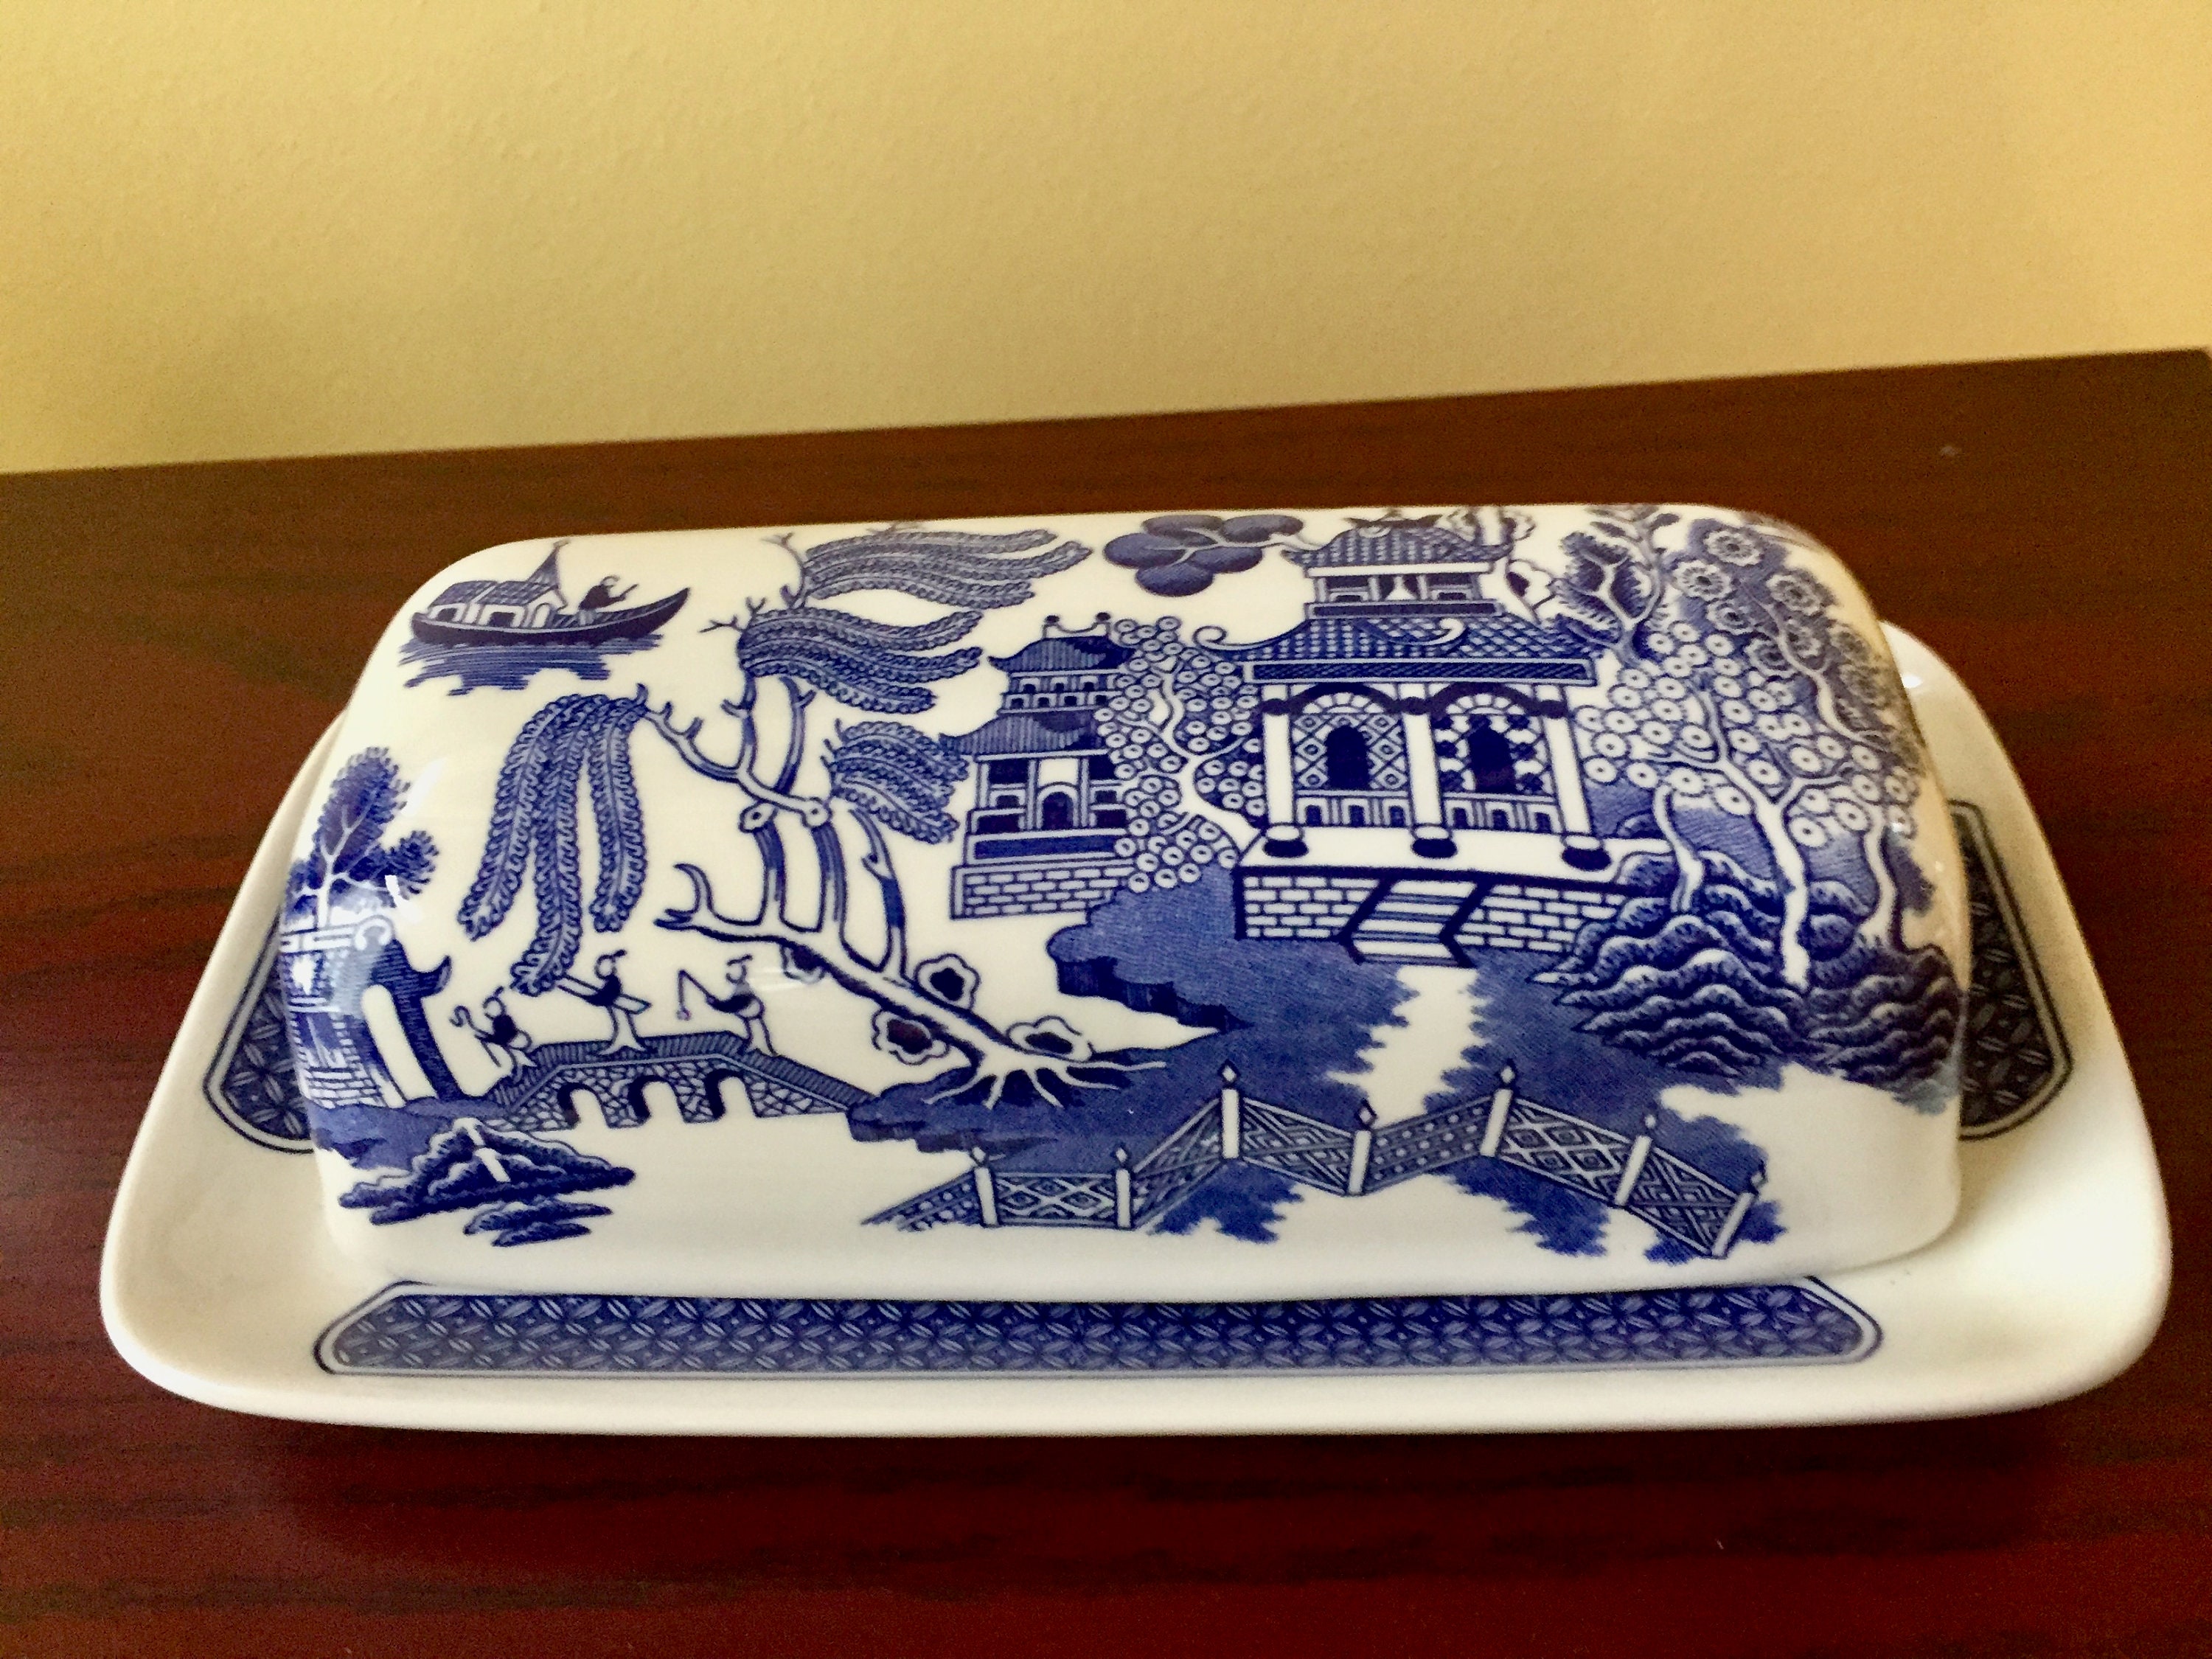 butter dish-pottery butter dish-covered ceramic butter dish — CRUTCHFIELD  POTTERY